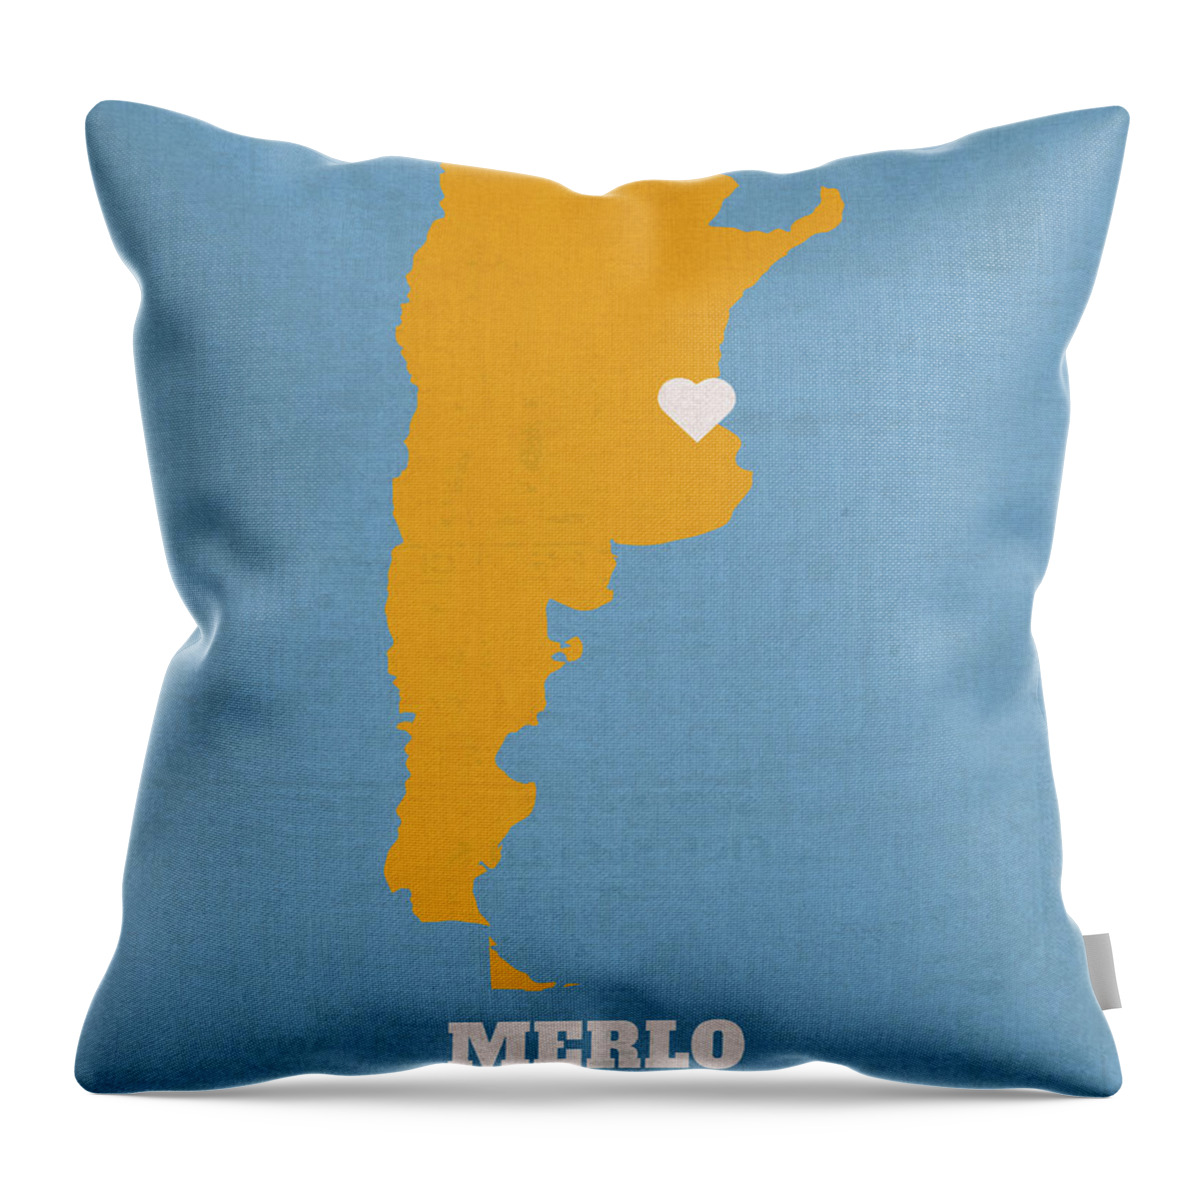 Merlo Throw Pillow featuring the mixed media Merlo Argentina Founded 1755 World Cities Heart by Design Turnpike